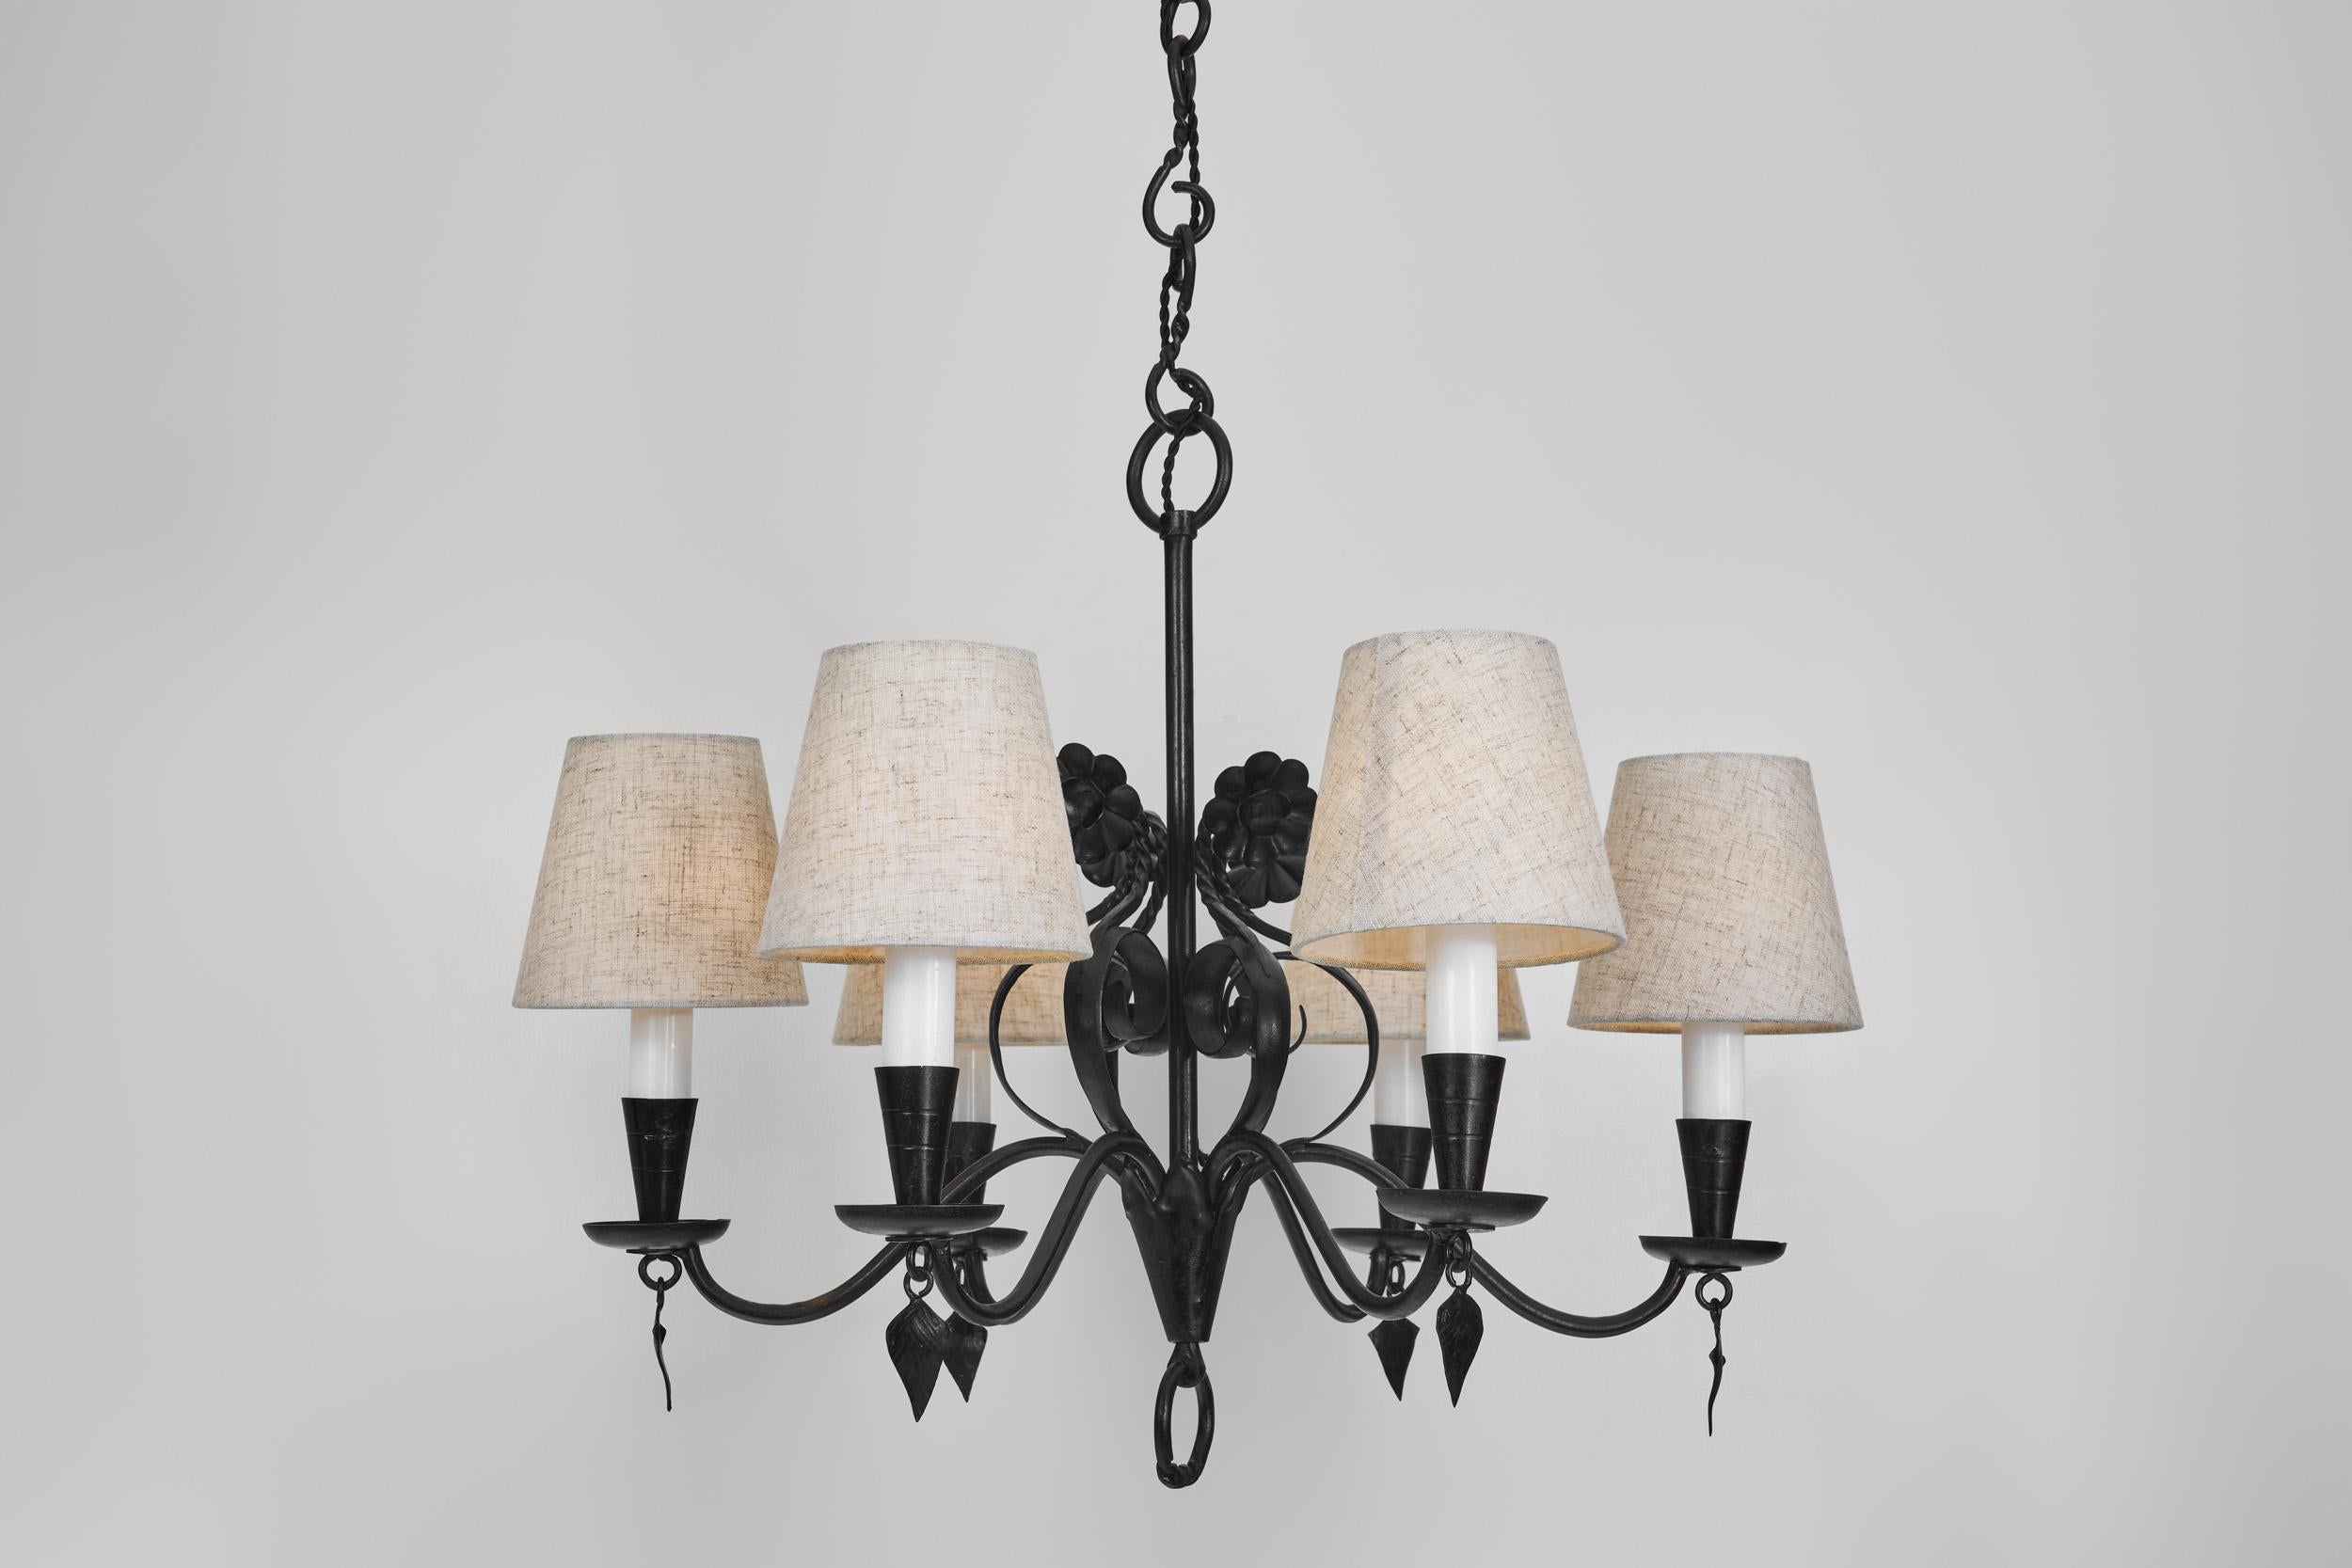 Fabric Paavo Tynell “R4/1704” Wrought Iron Chandelier for Taito, Finland 1930s For Sale